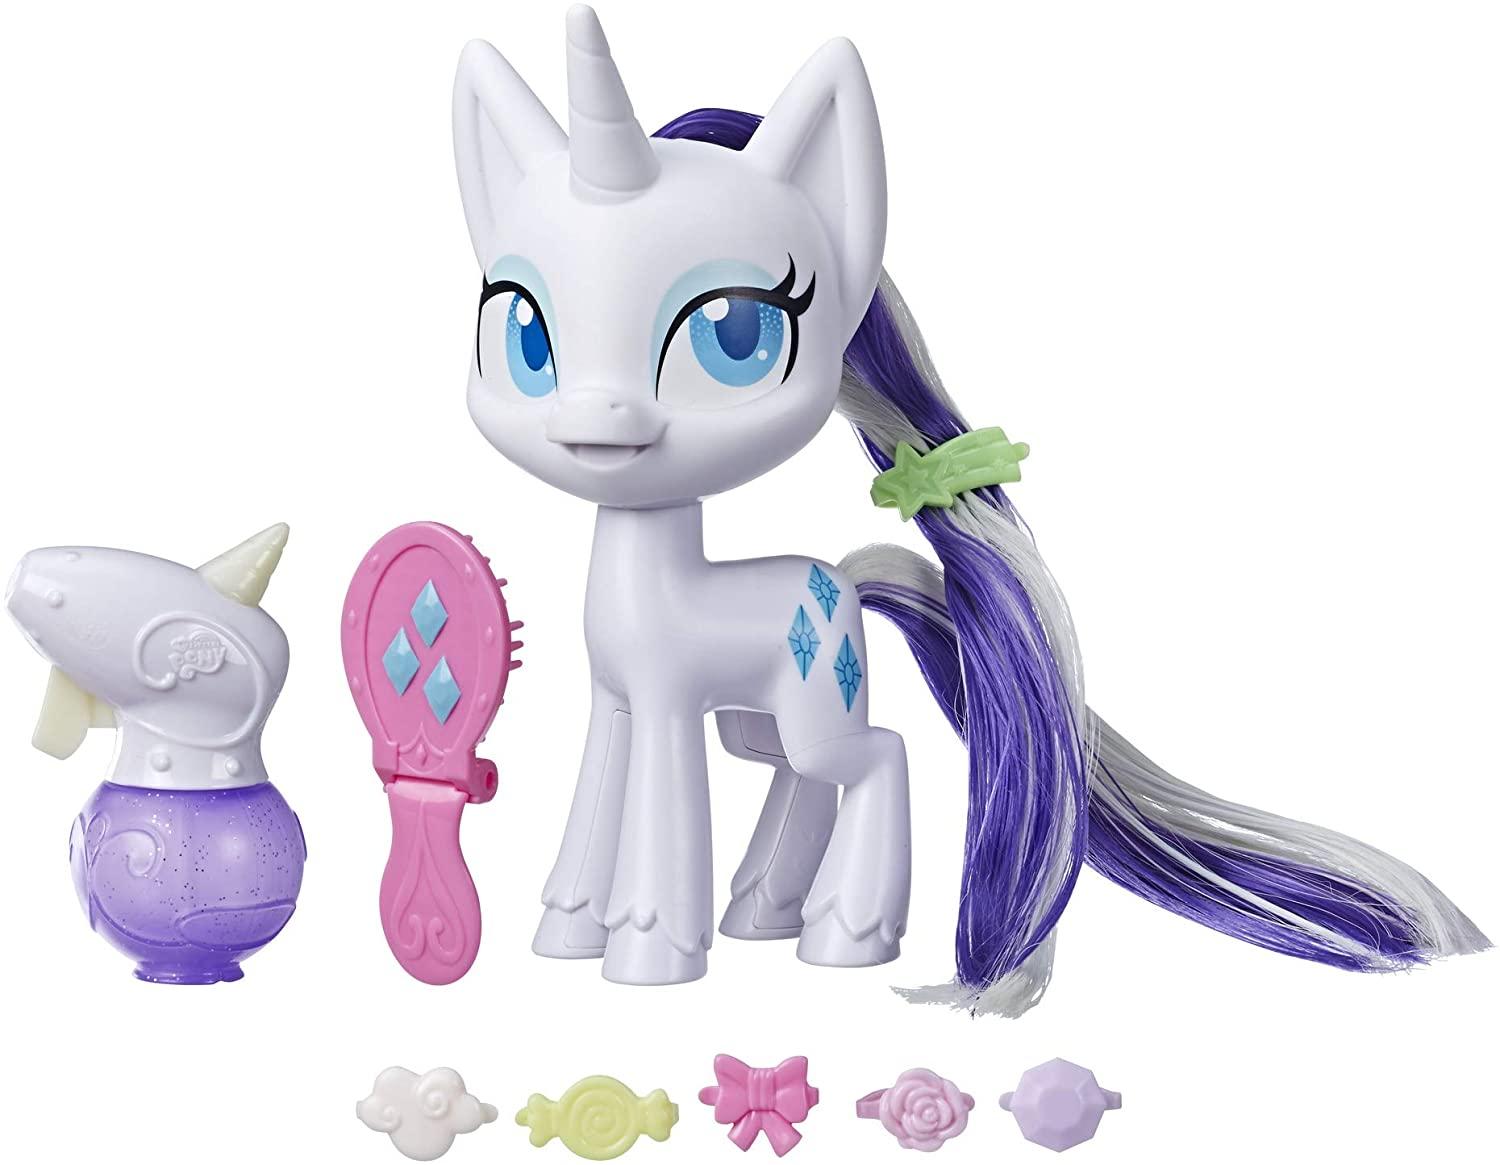 My Little Pony Magical Mane Rarity Toy 6.5in Hair Styling Pony Figure for $11.93